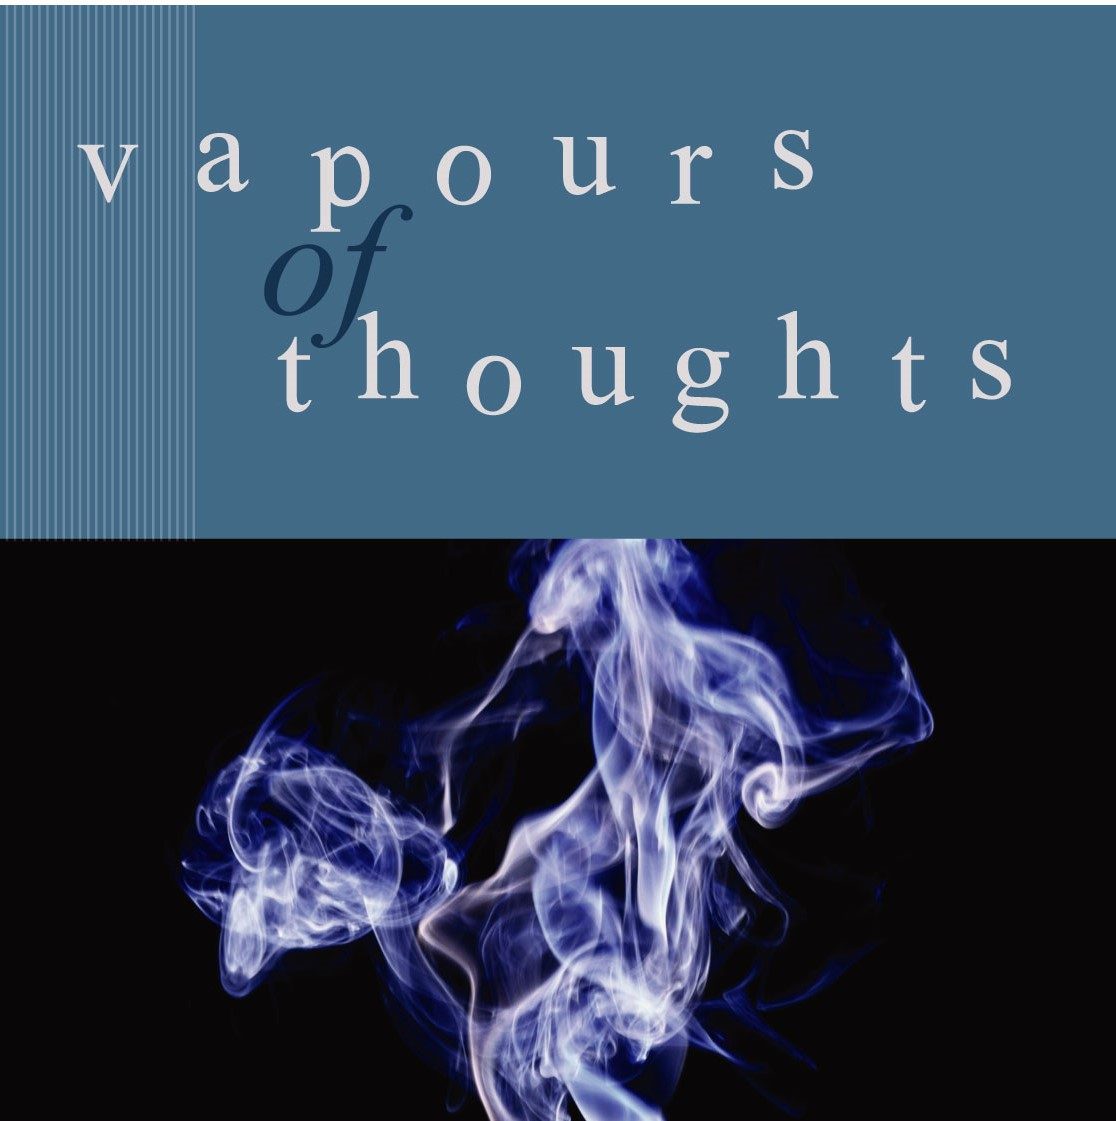 vapoursofthoughts